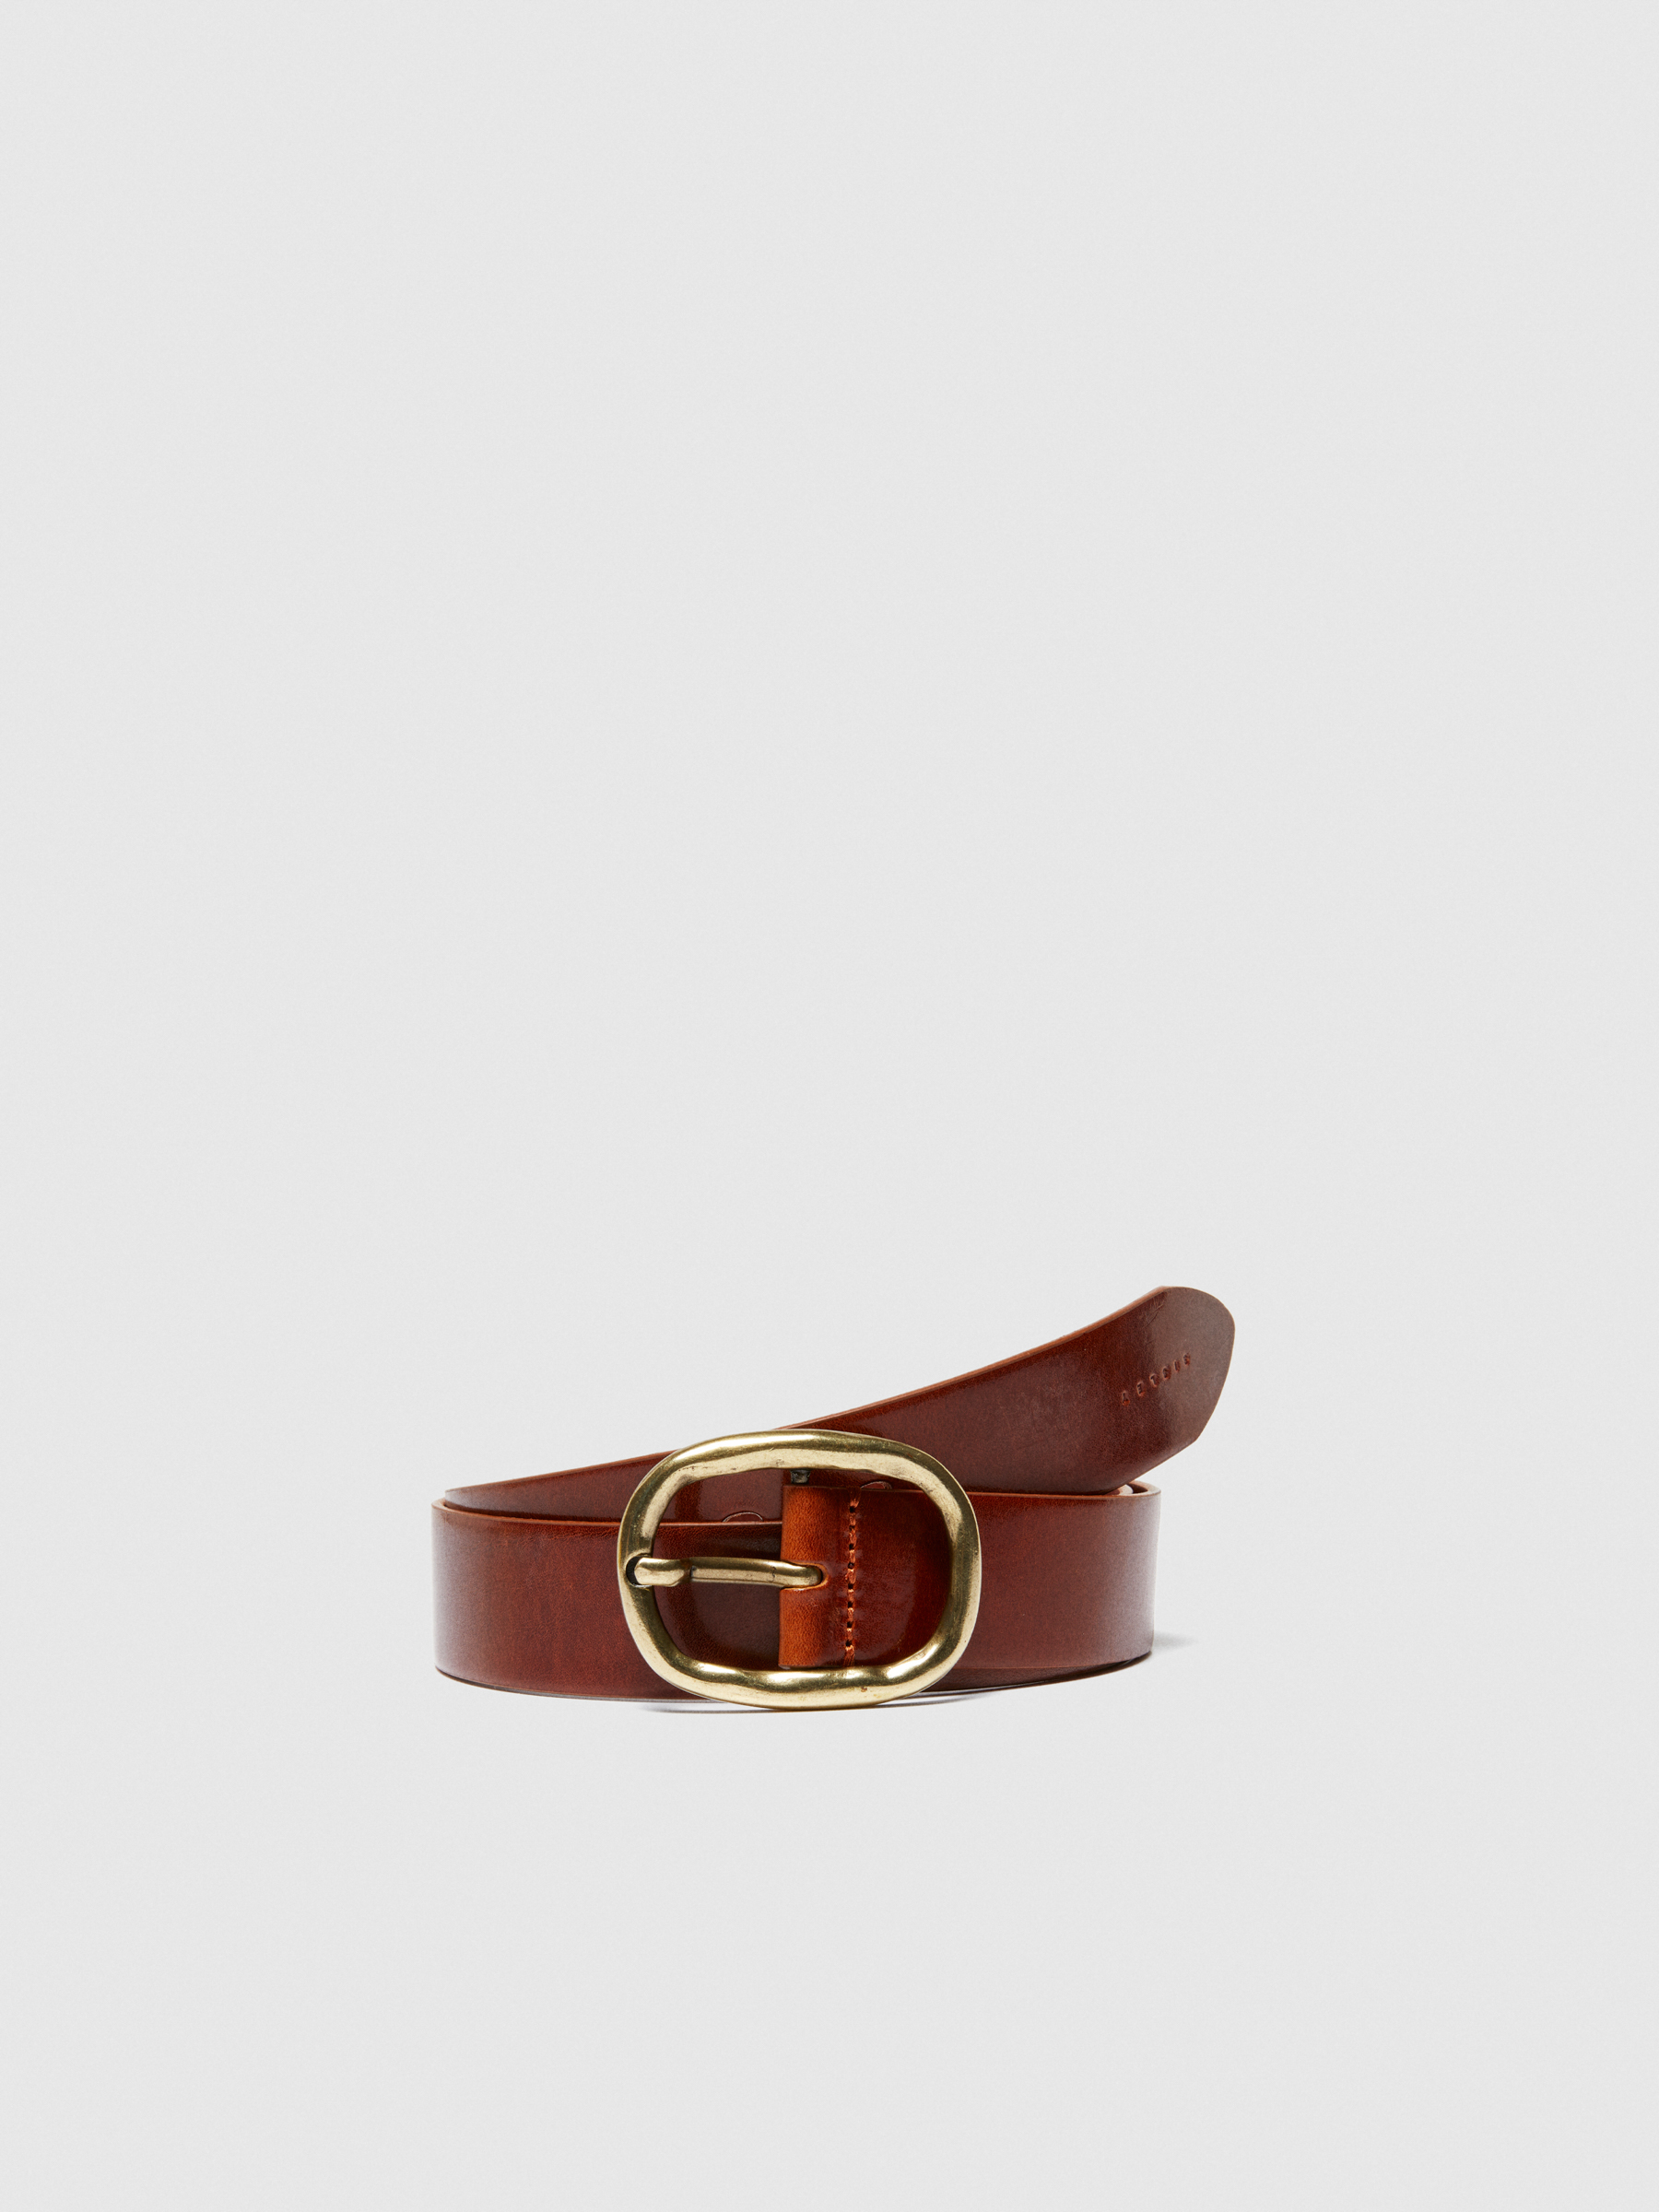 Sisley - Low-hanging Leather Belt, Woman, Camel, Size: S